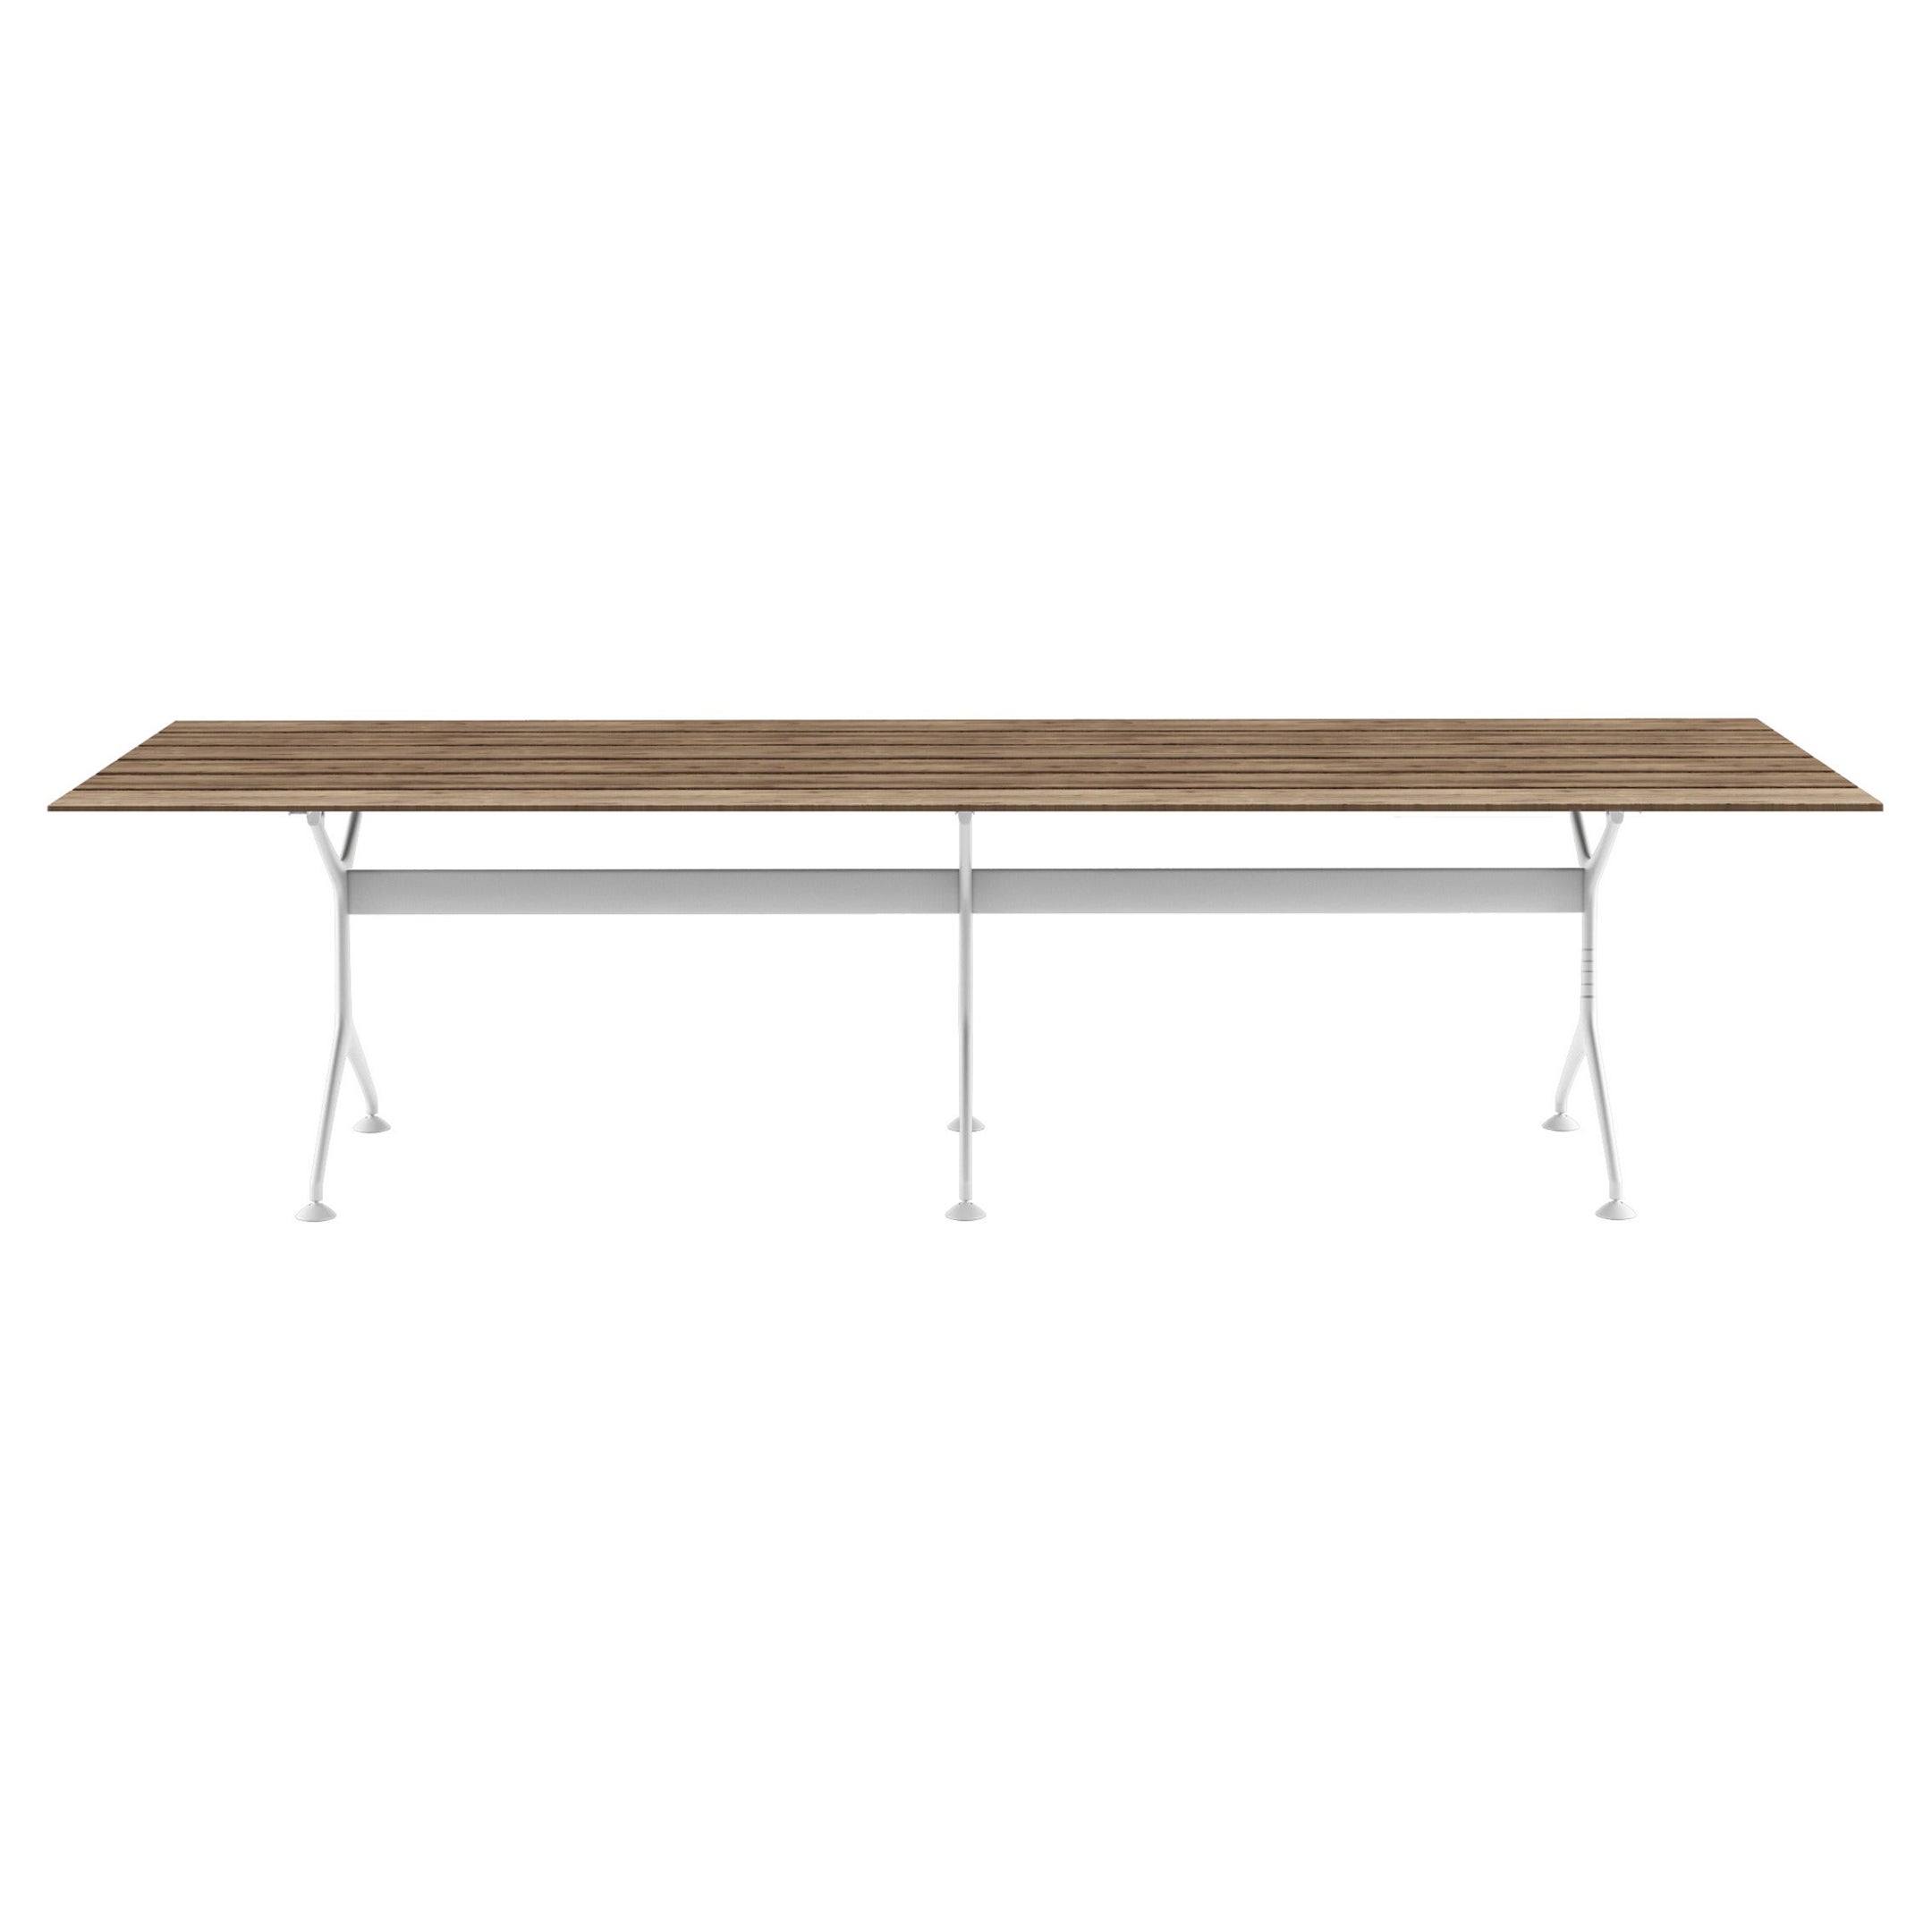 Alias M25 Tech Wood Outdoor Table 300 in Ash and Lacquered Aluminium Frame For Sale